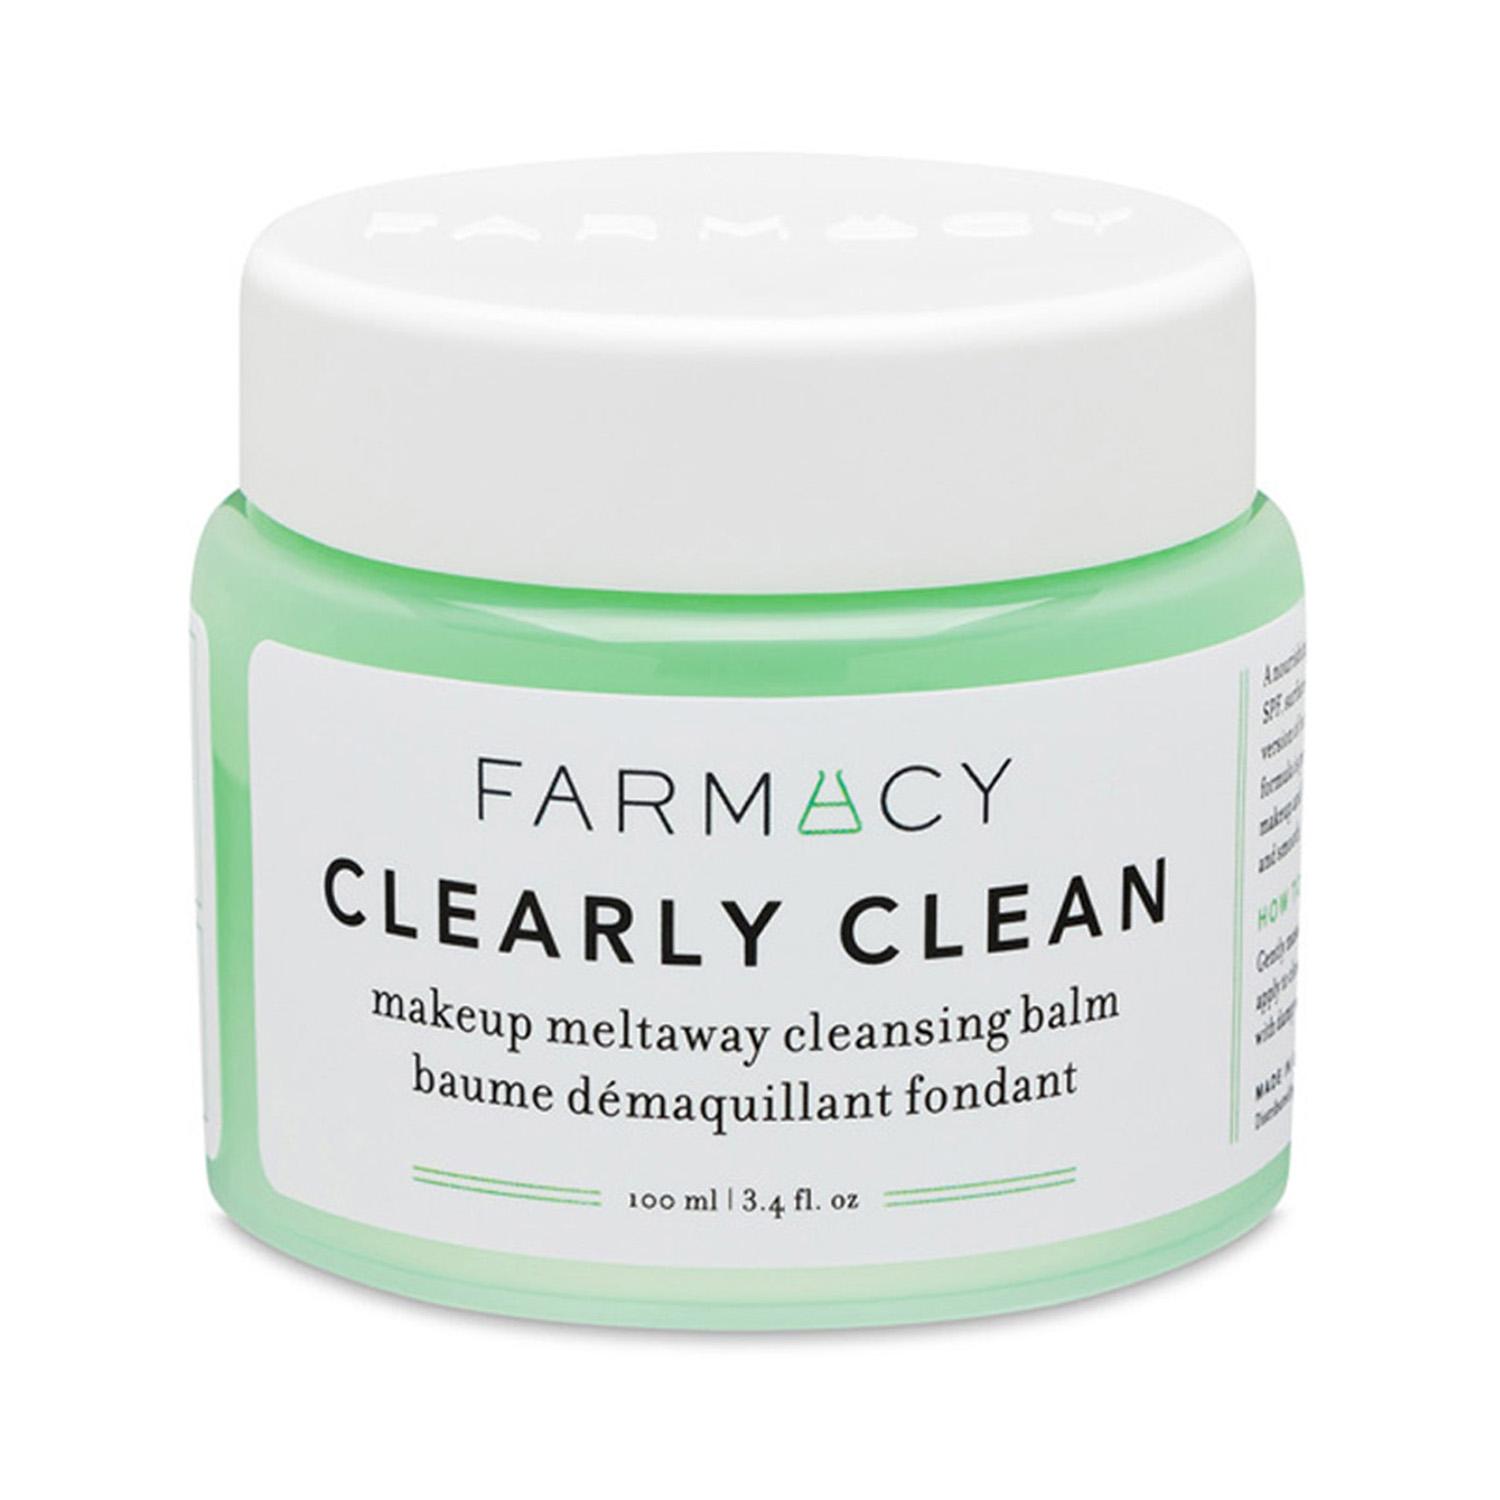 Farmacy Beauty | Farmacy Beauty Clearly Clean Makeup Removing Cleansing Balm (100ml)